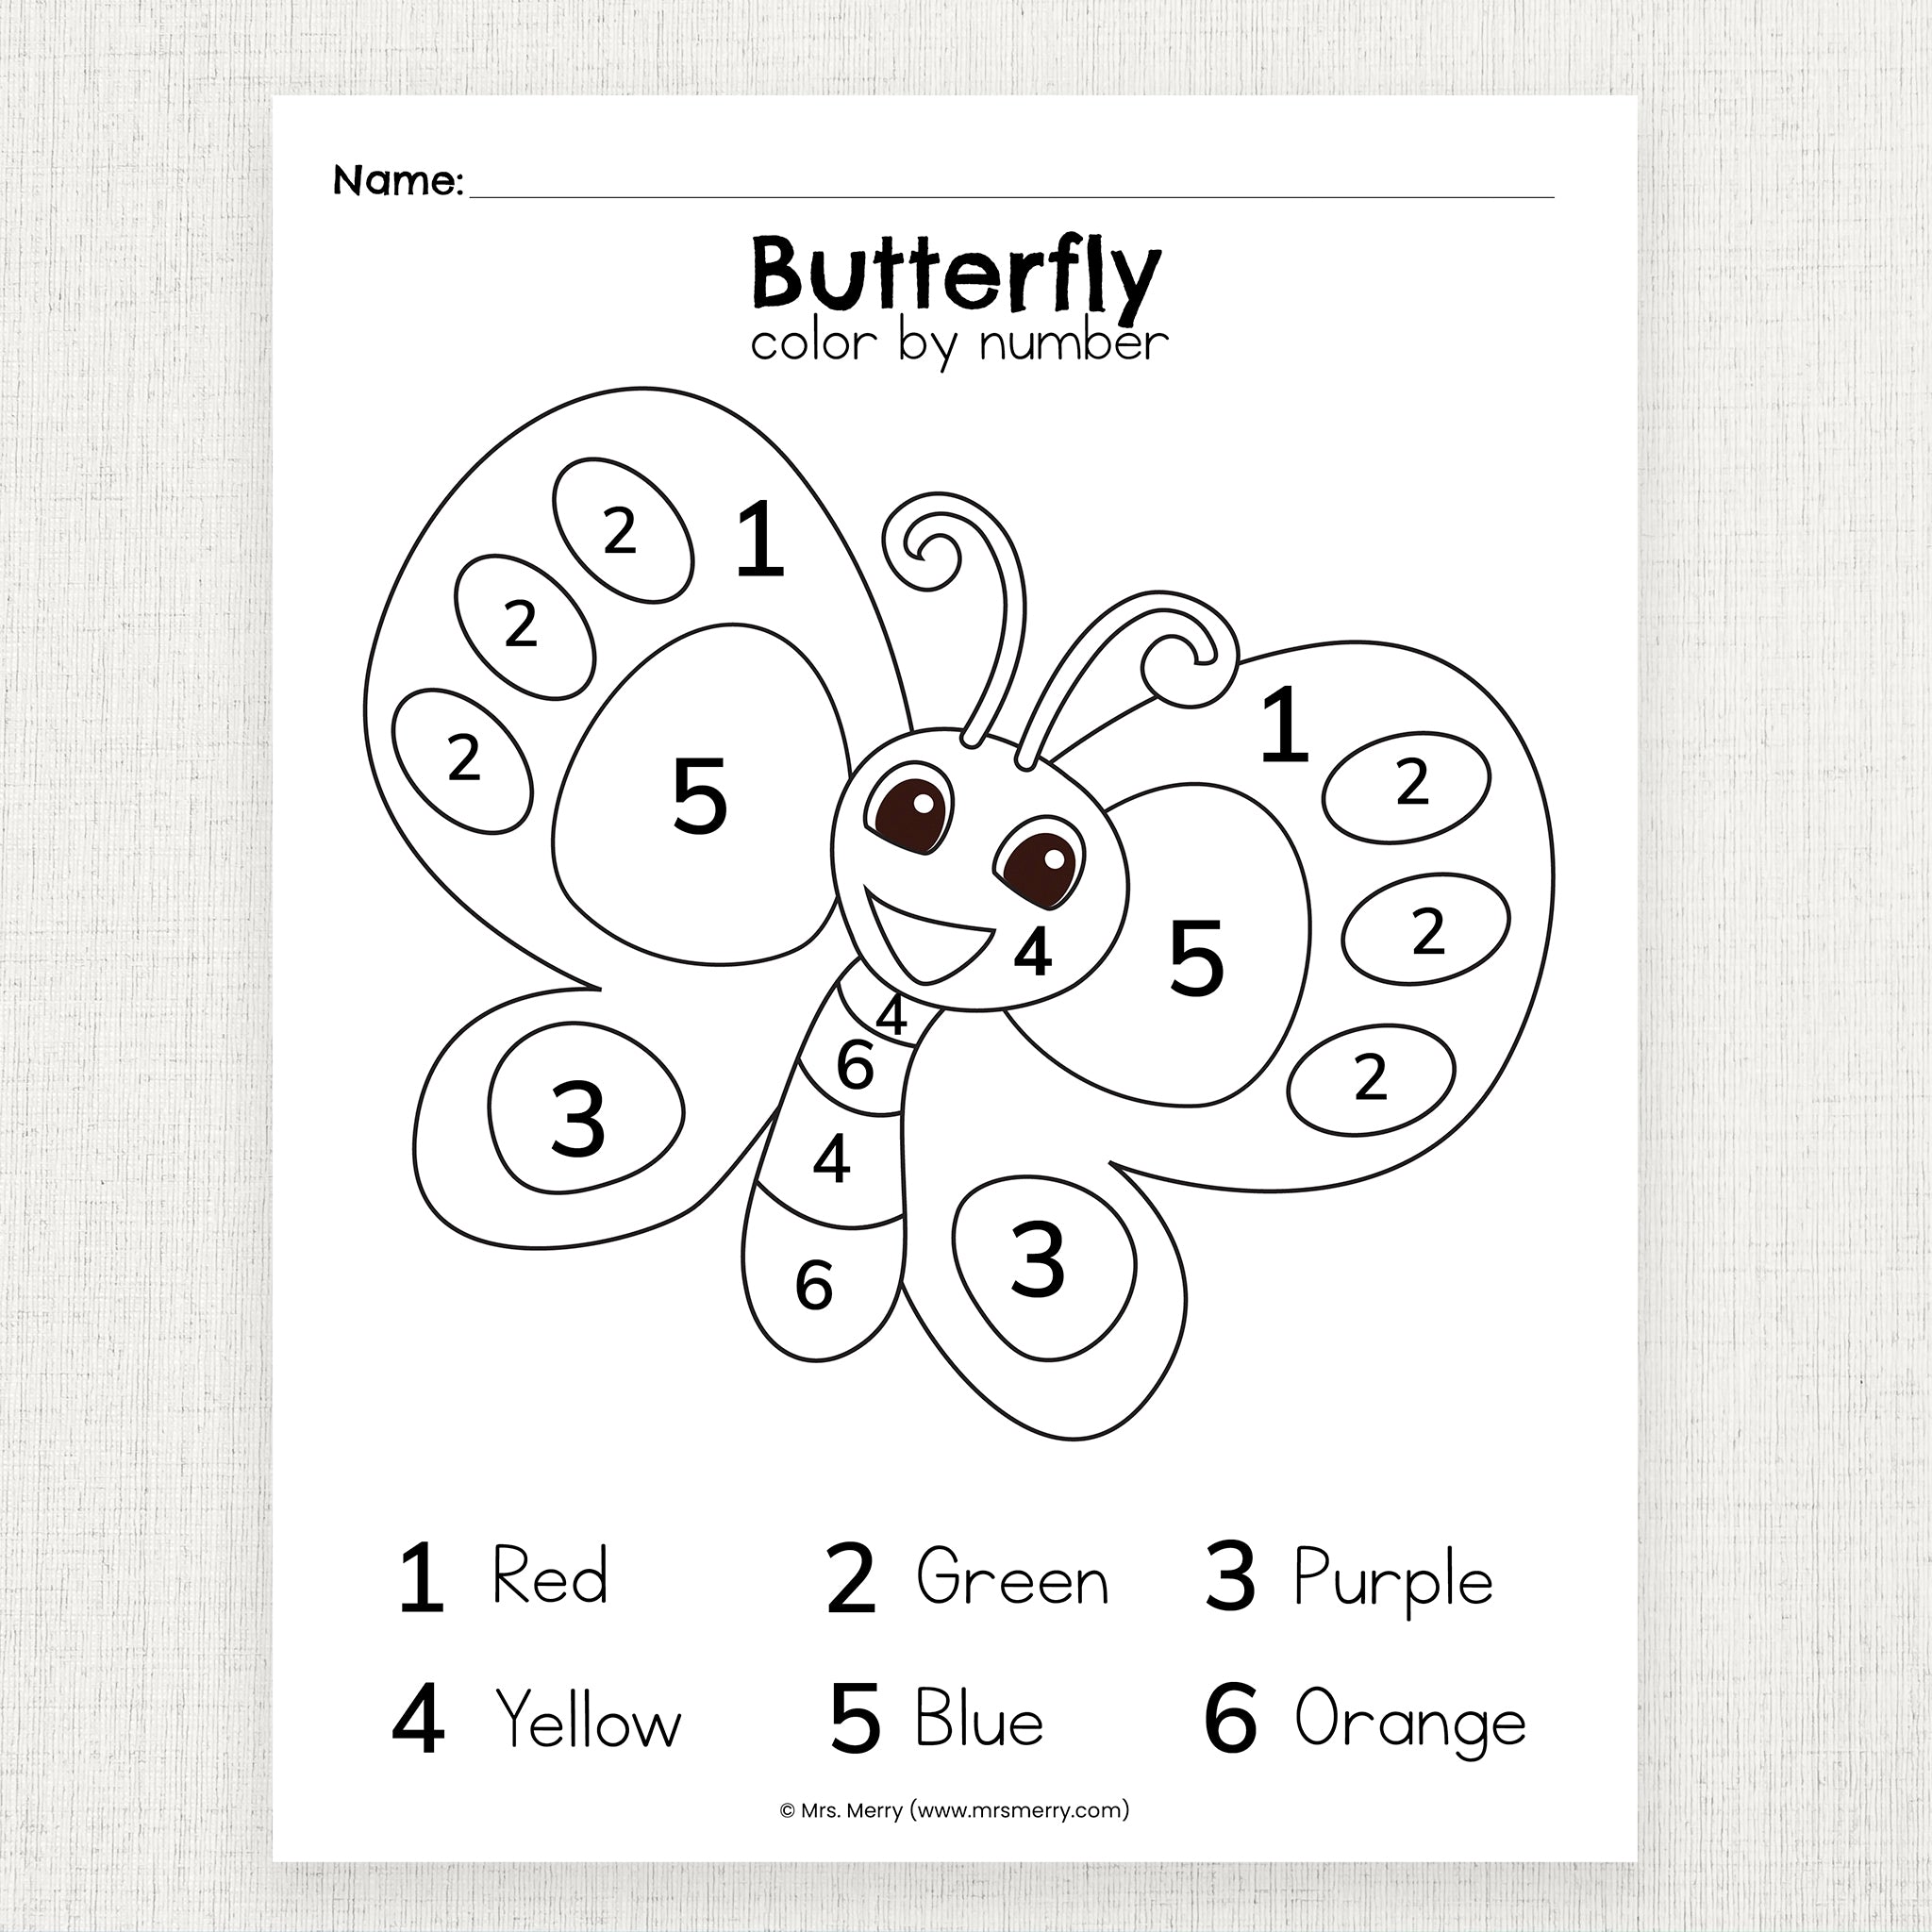 butterfly-color-by-number-printable-mrs-merry